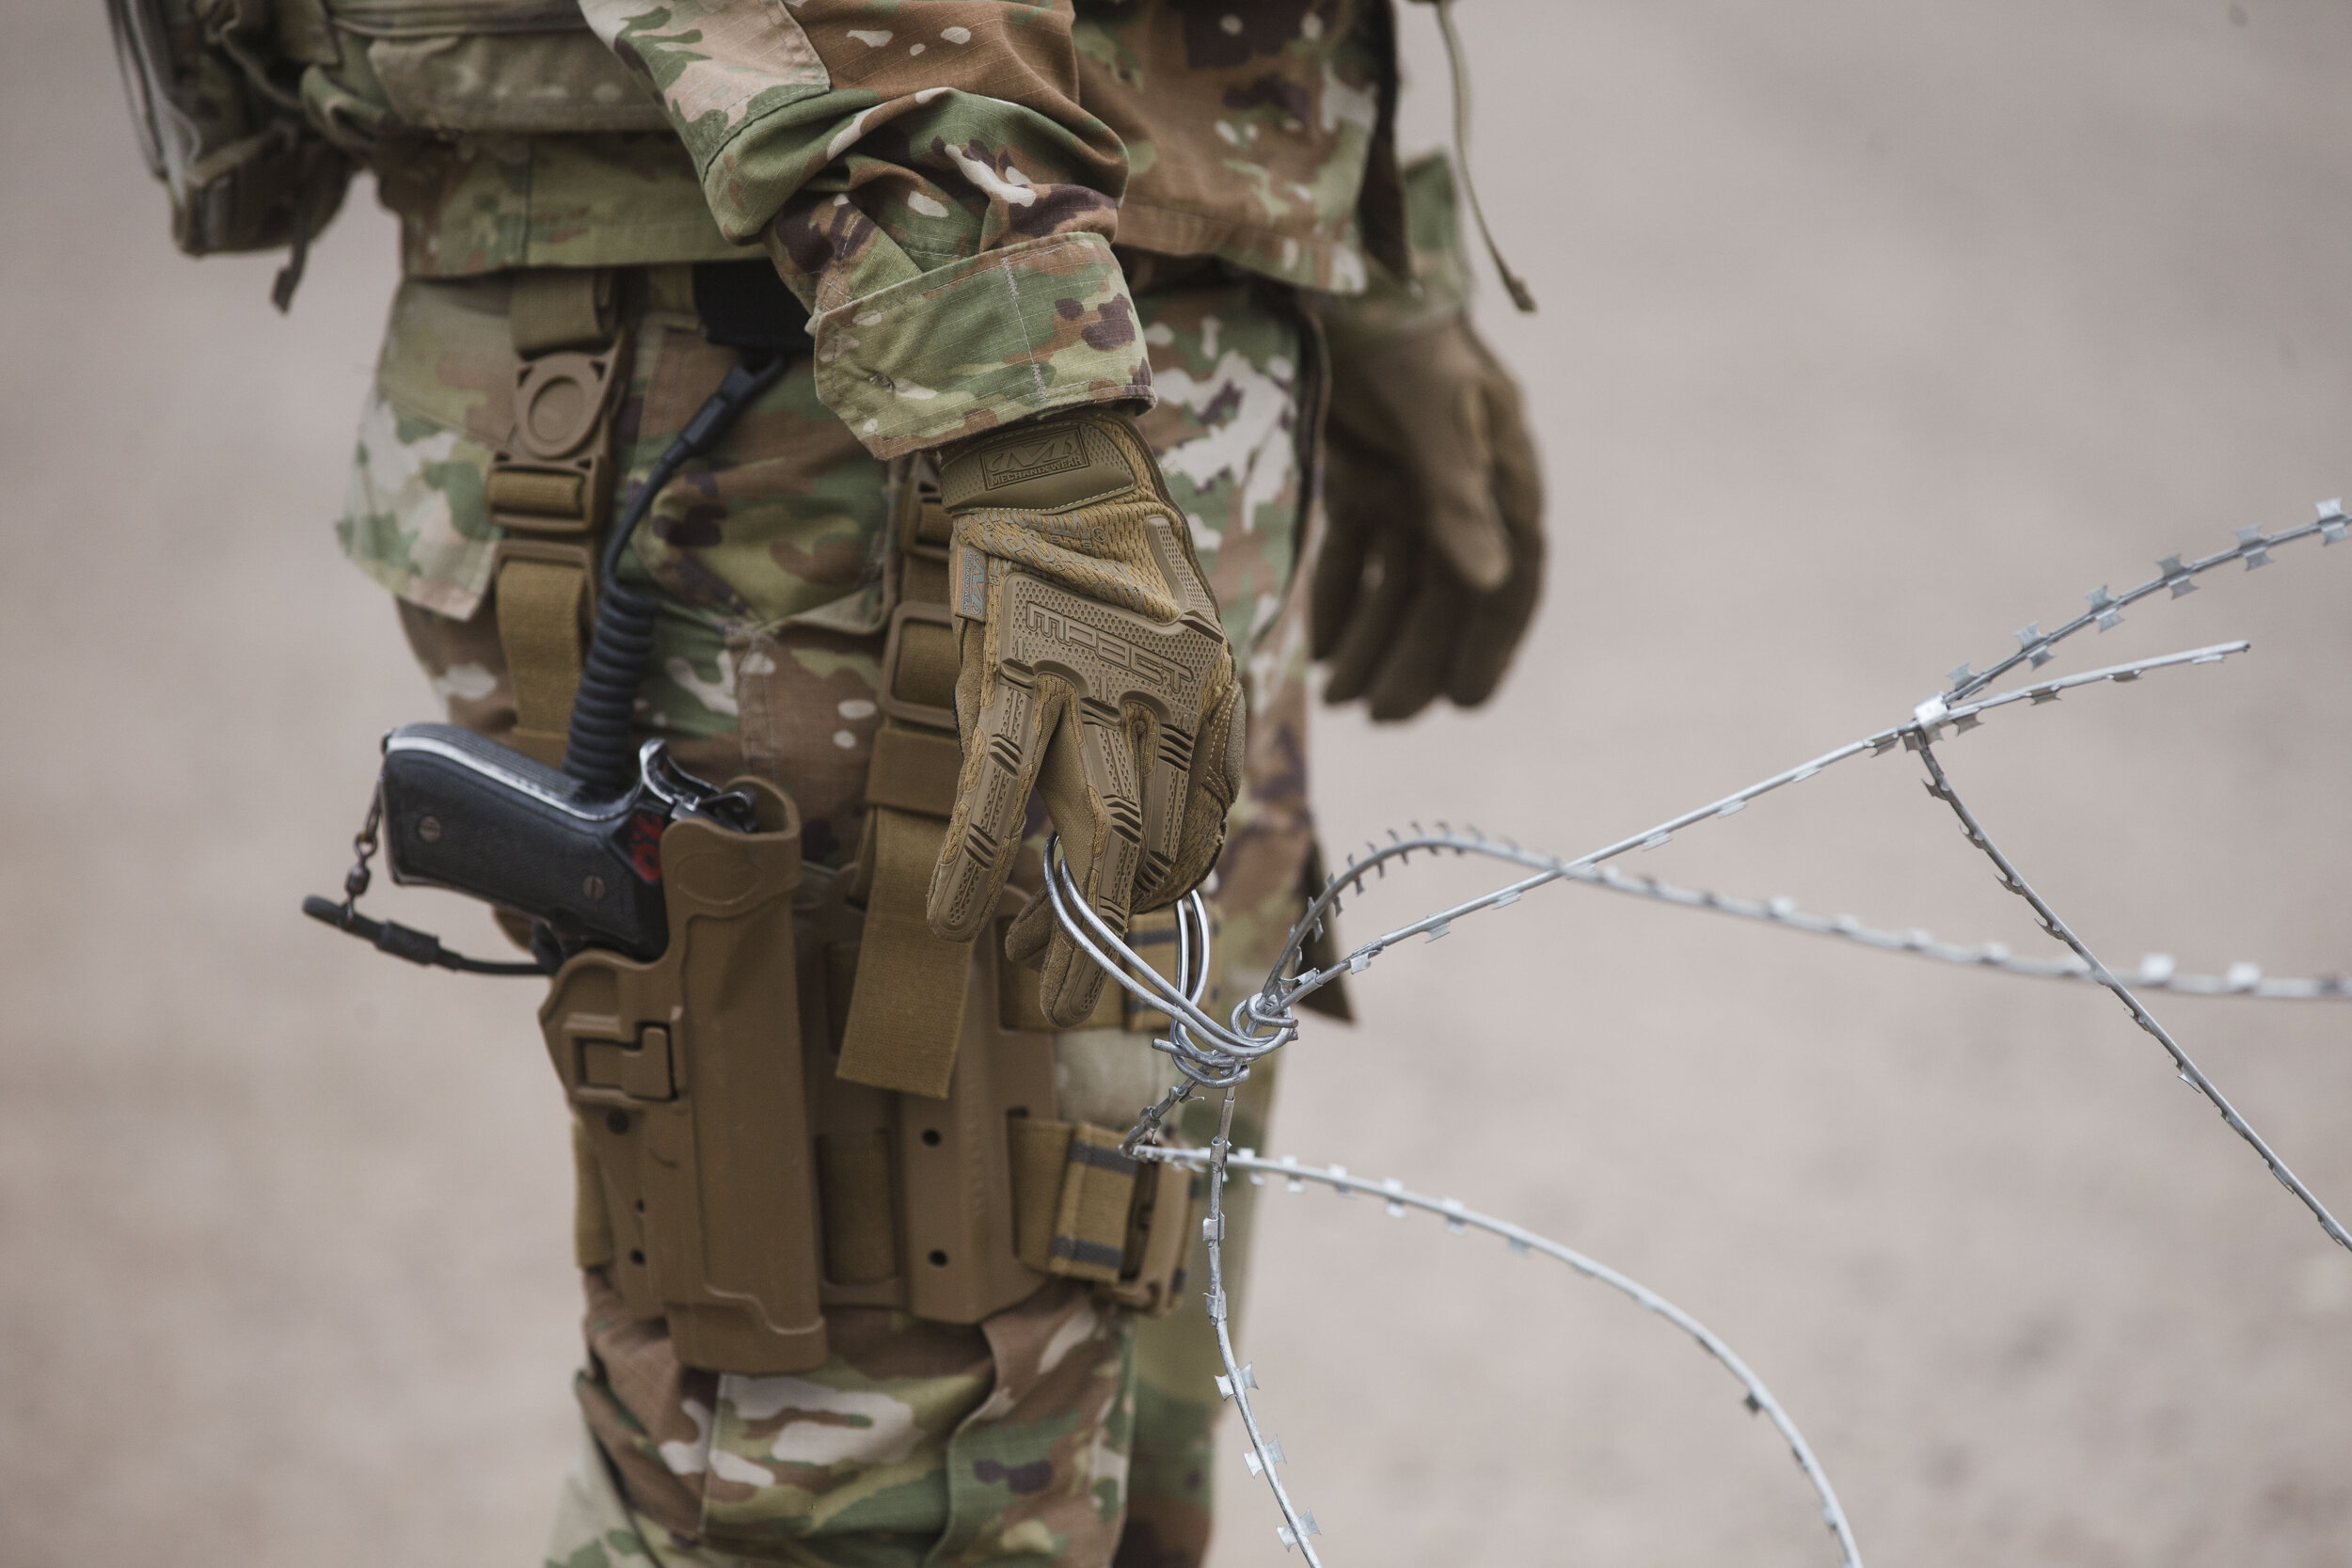  U.S. Army troops deployed to the U.S.-Mexico border in Texas set up a Military camp at the old Craig's Furniture in Weslaco, TX.  Army personal use barbed wire as barrier gate at the entrance to the camp on Wednesday, Dec. 5, 2018.  Defense Secretar